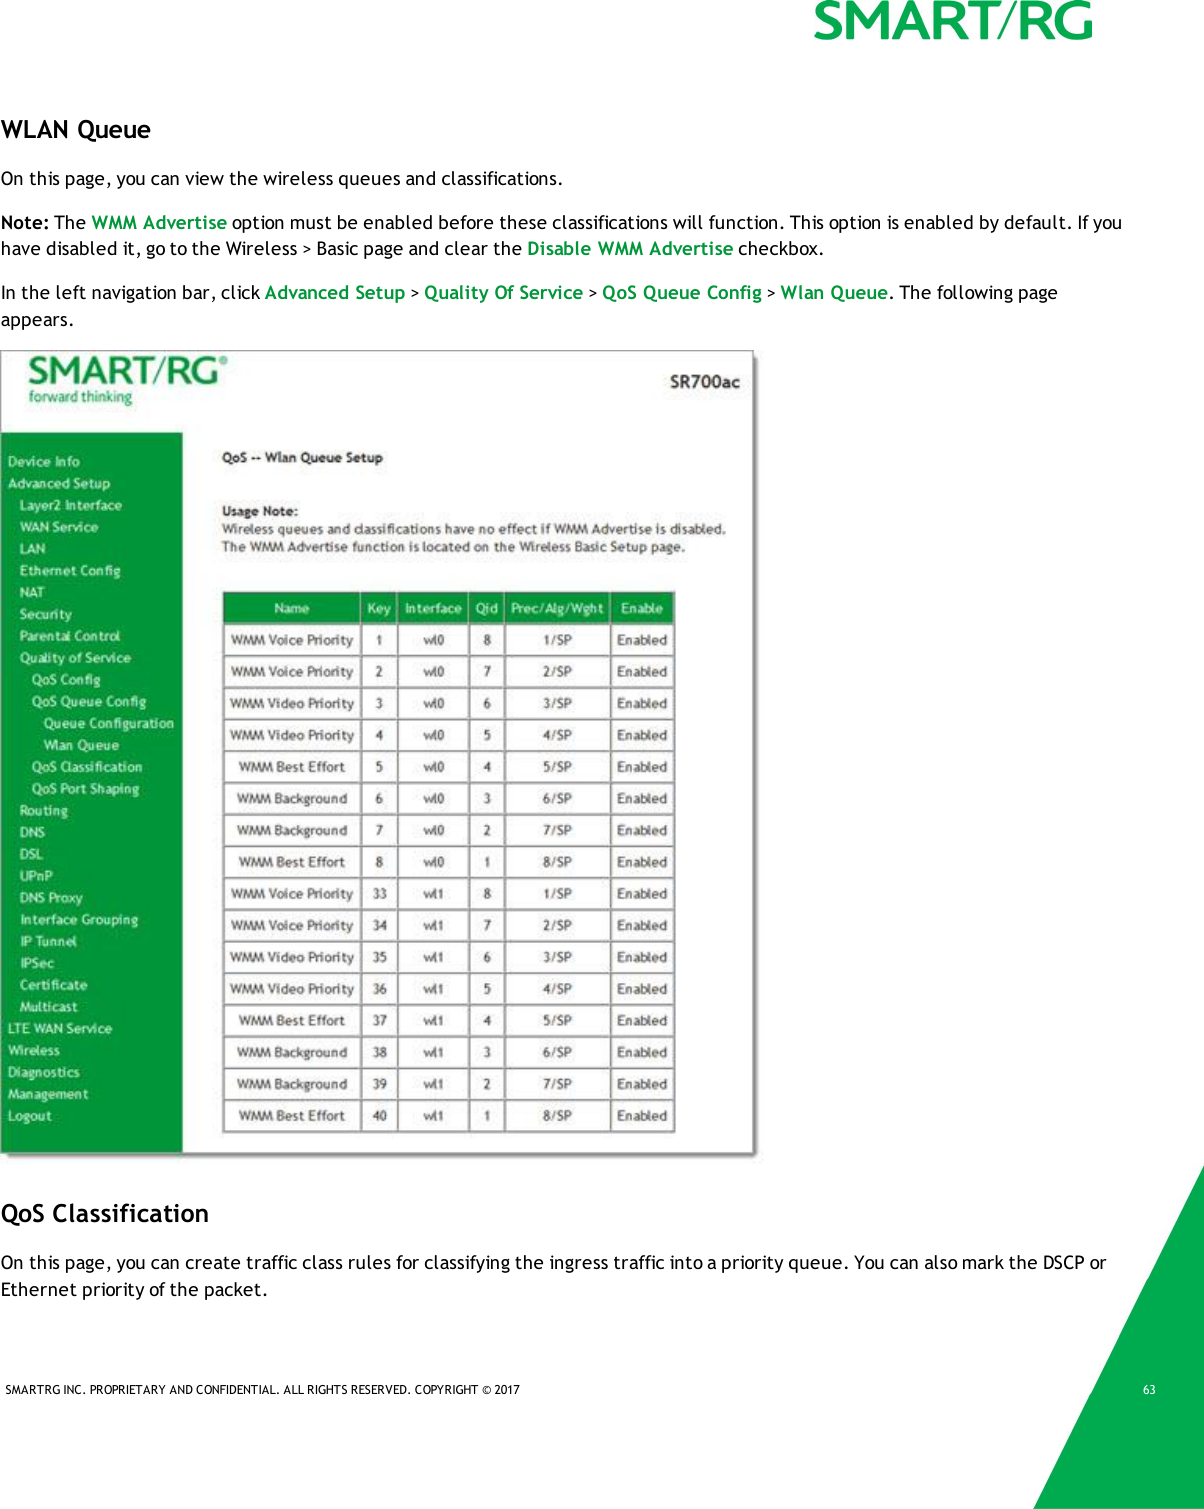 SMARTRG INC. PROPRIETARY AND CONFIDENTIAL. ALL RIGHTS RESERVED. COPYRIGHT © 2017 63WLAN QueueOn this page, you can view the wireless queues and classifications.Note: The WMM Advertise option must be enabled before these classifications will function. This option is enabled by default. If youhave disabled it, go to the Wireless &gt; Basic page and clear the Disable WMM Advertise checkbox.In the left navigation bar, click Advanced Setup &gt;Quality Of Service &gt;QoS Queue Config &gt;Wlan Queue. The following pageappears.QoS ClassificationOn this page, you can create traffic class rules for classifying the ingress traffic into a priority queue. You can also mark the DSCP orEthernet priority of the packet.